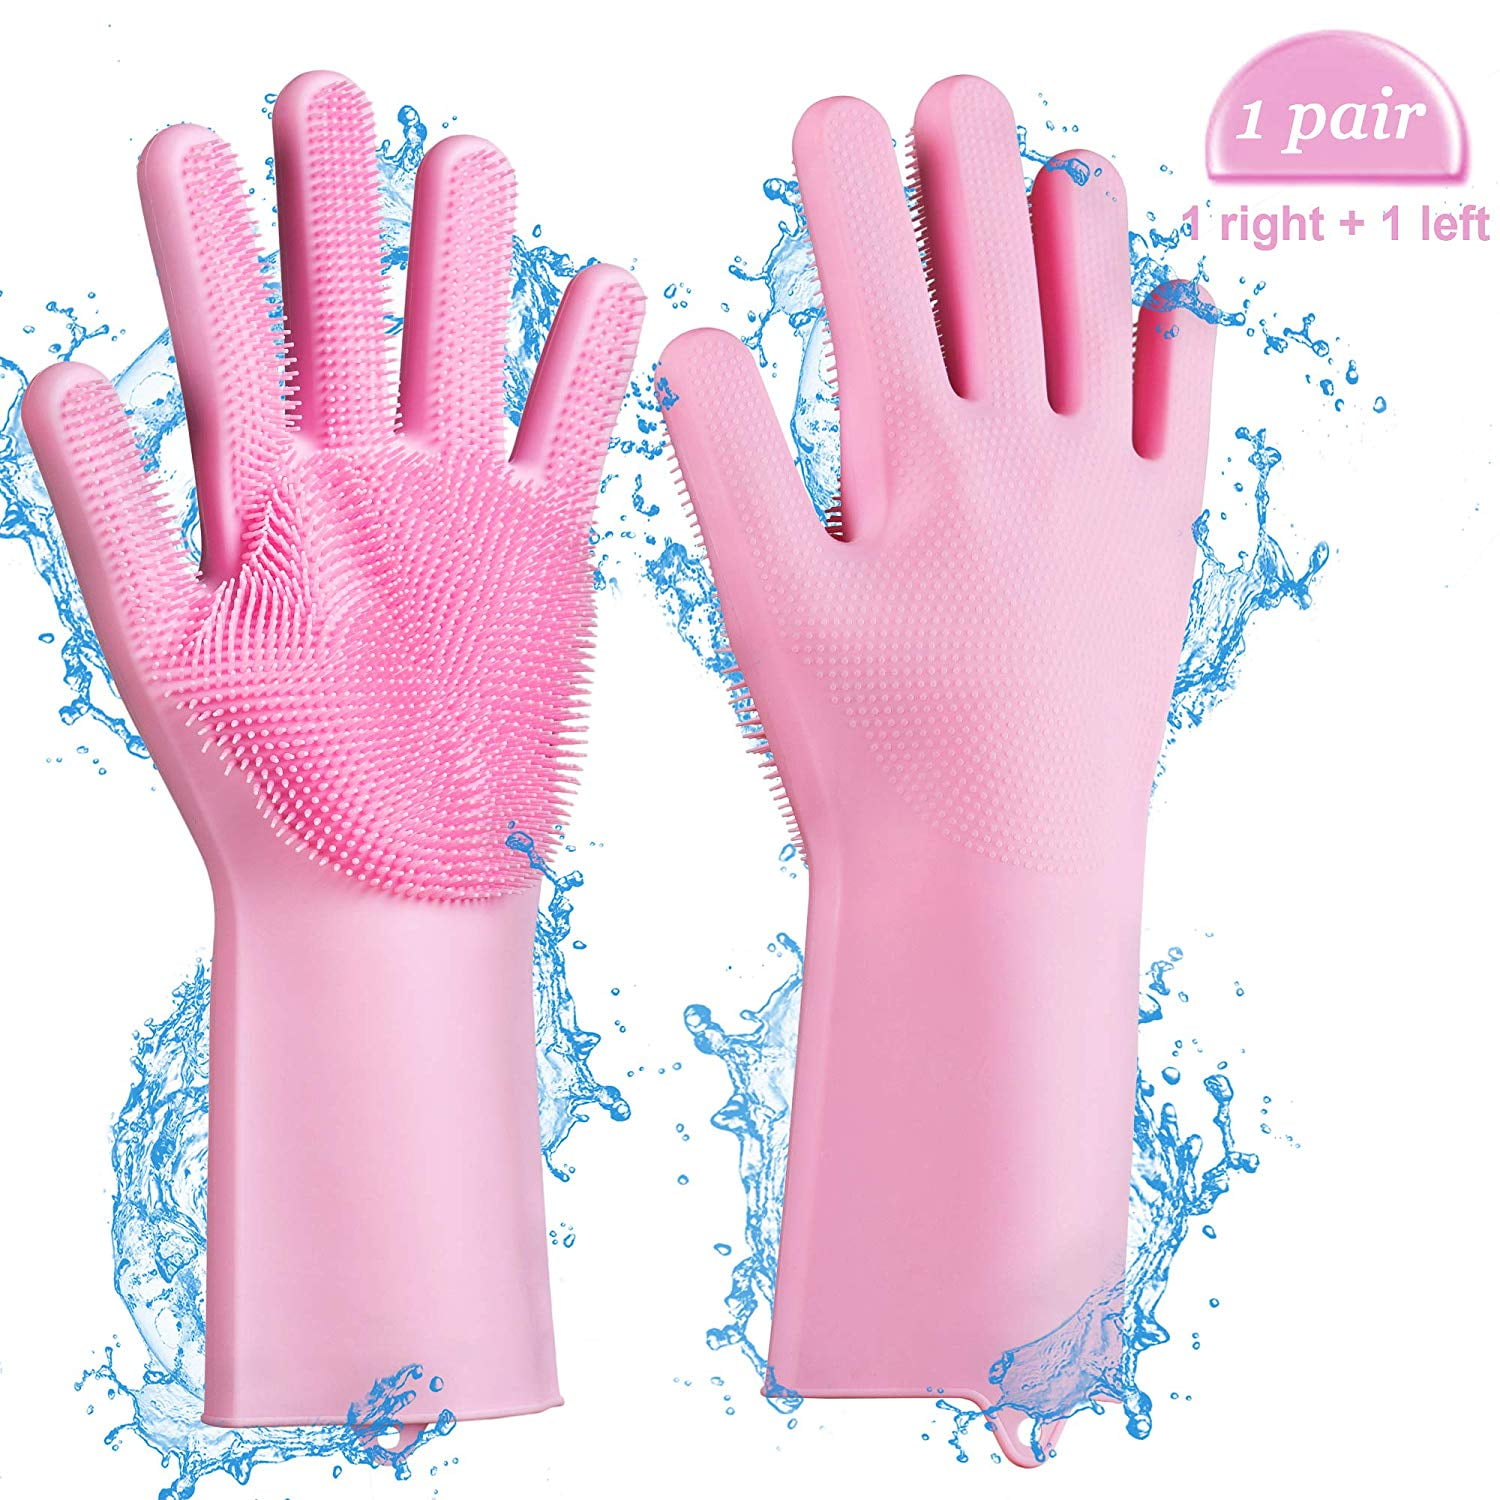 Irich Silicone Dishwashing Gloves with Scrubbing Bristles Gray Reusable Heat Resistant Cleaning Gloves for Kitchen Bathroom Cleaning Pet Bathing 